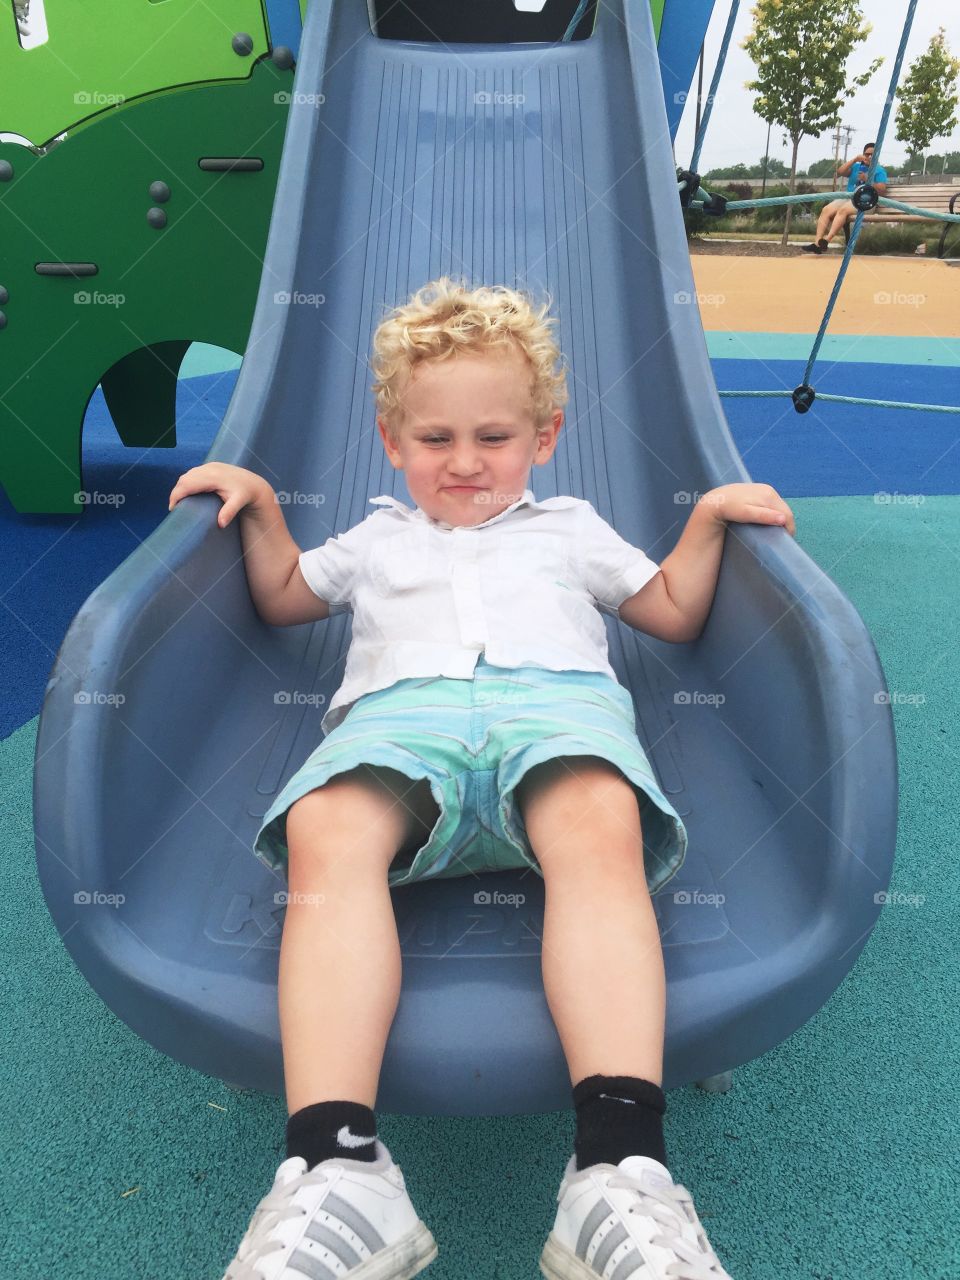 Toddler boy going down the slide at a playground 